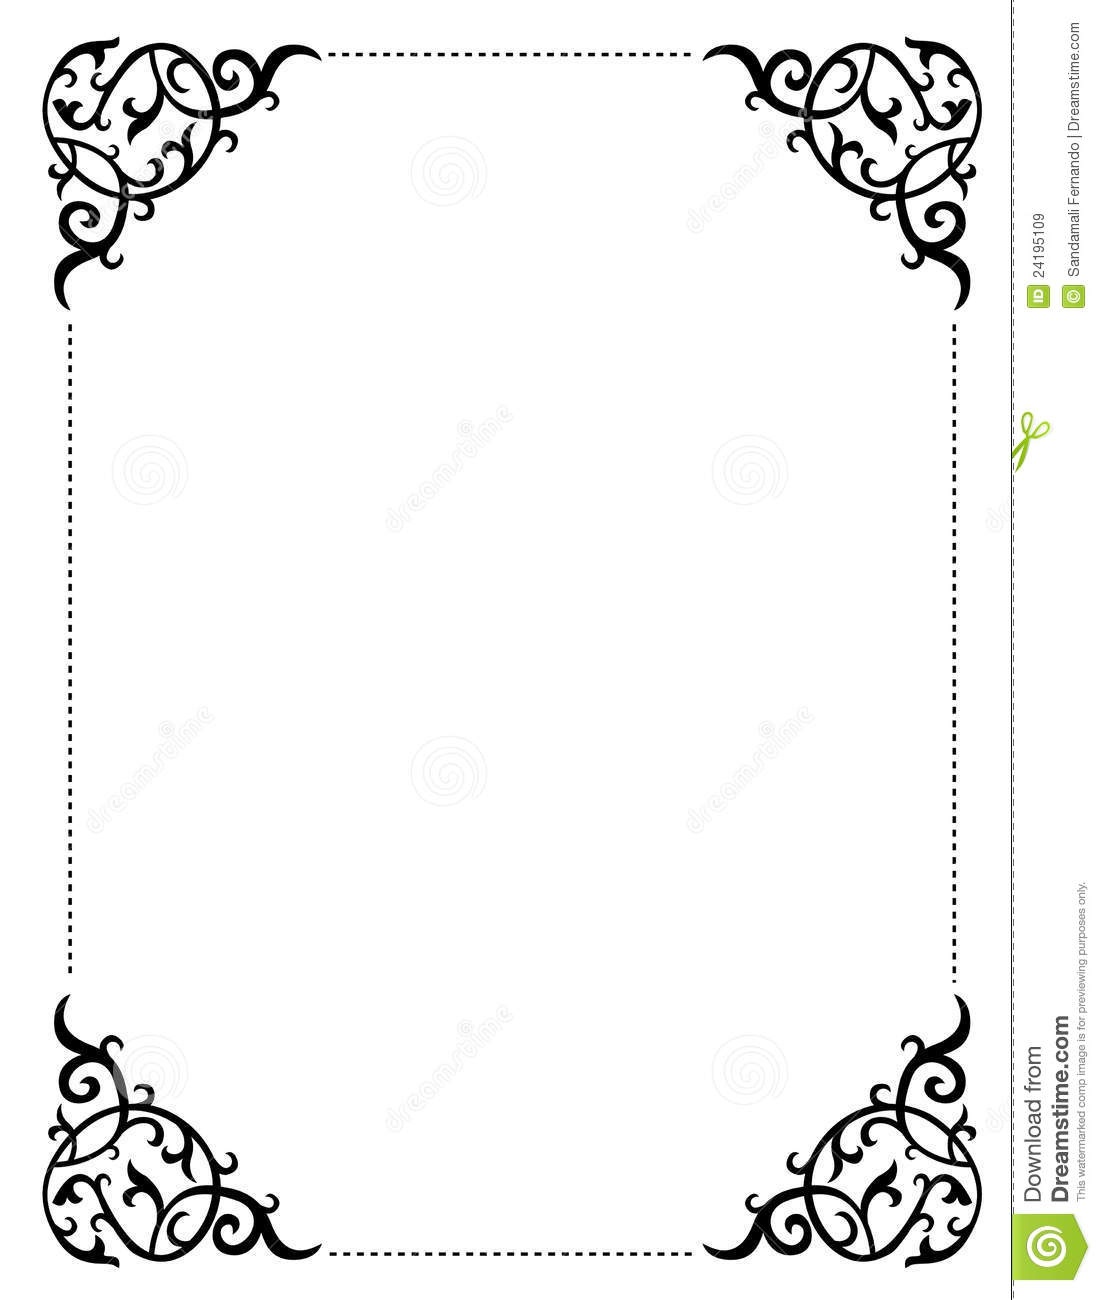 Printable Clipart Borders | Free Download Best Printable Clipart - Free Printable Borders